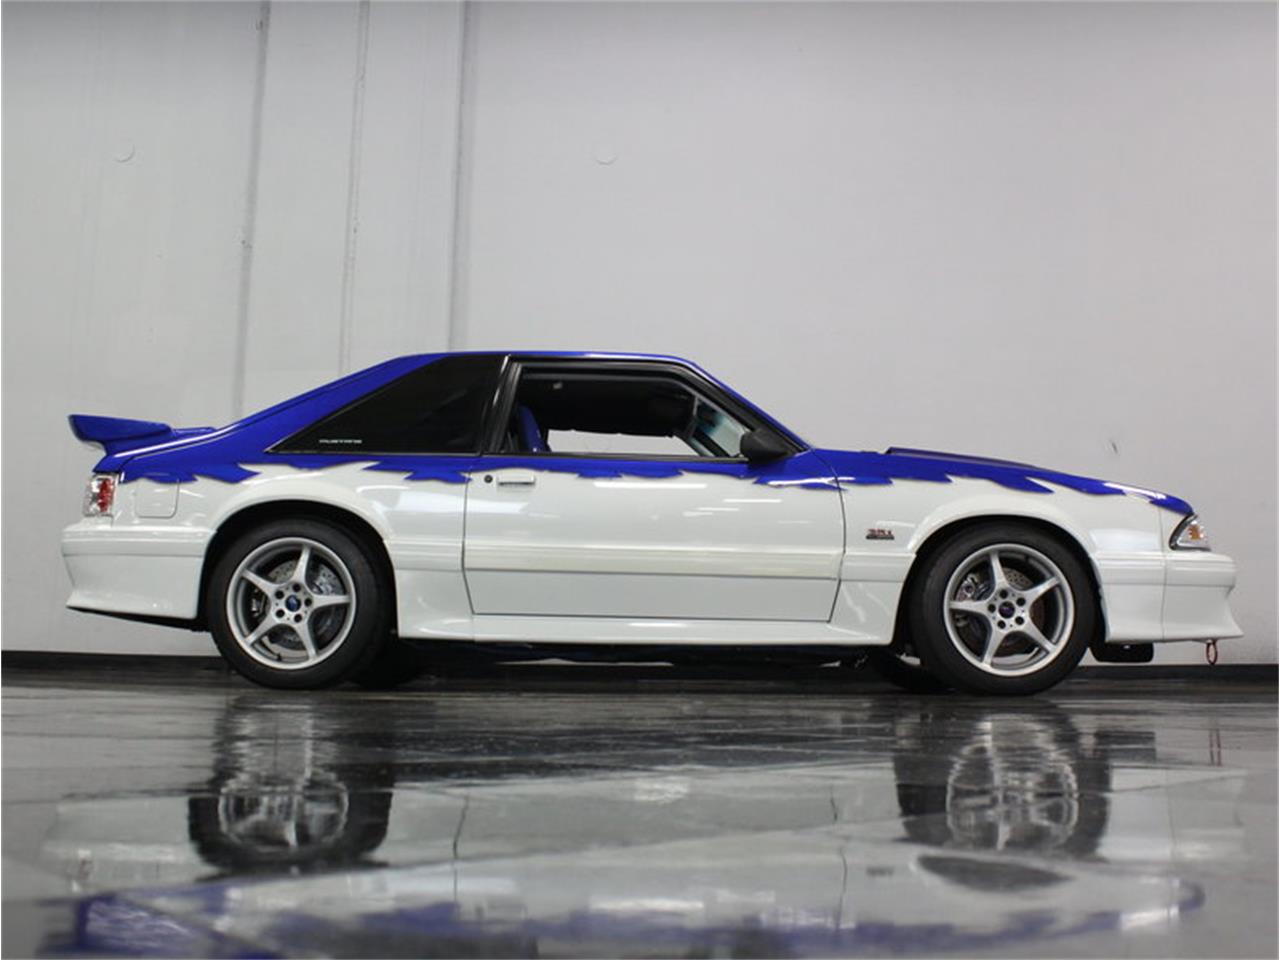 1989 Mustang Gt For Sale In Texas